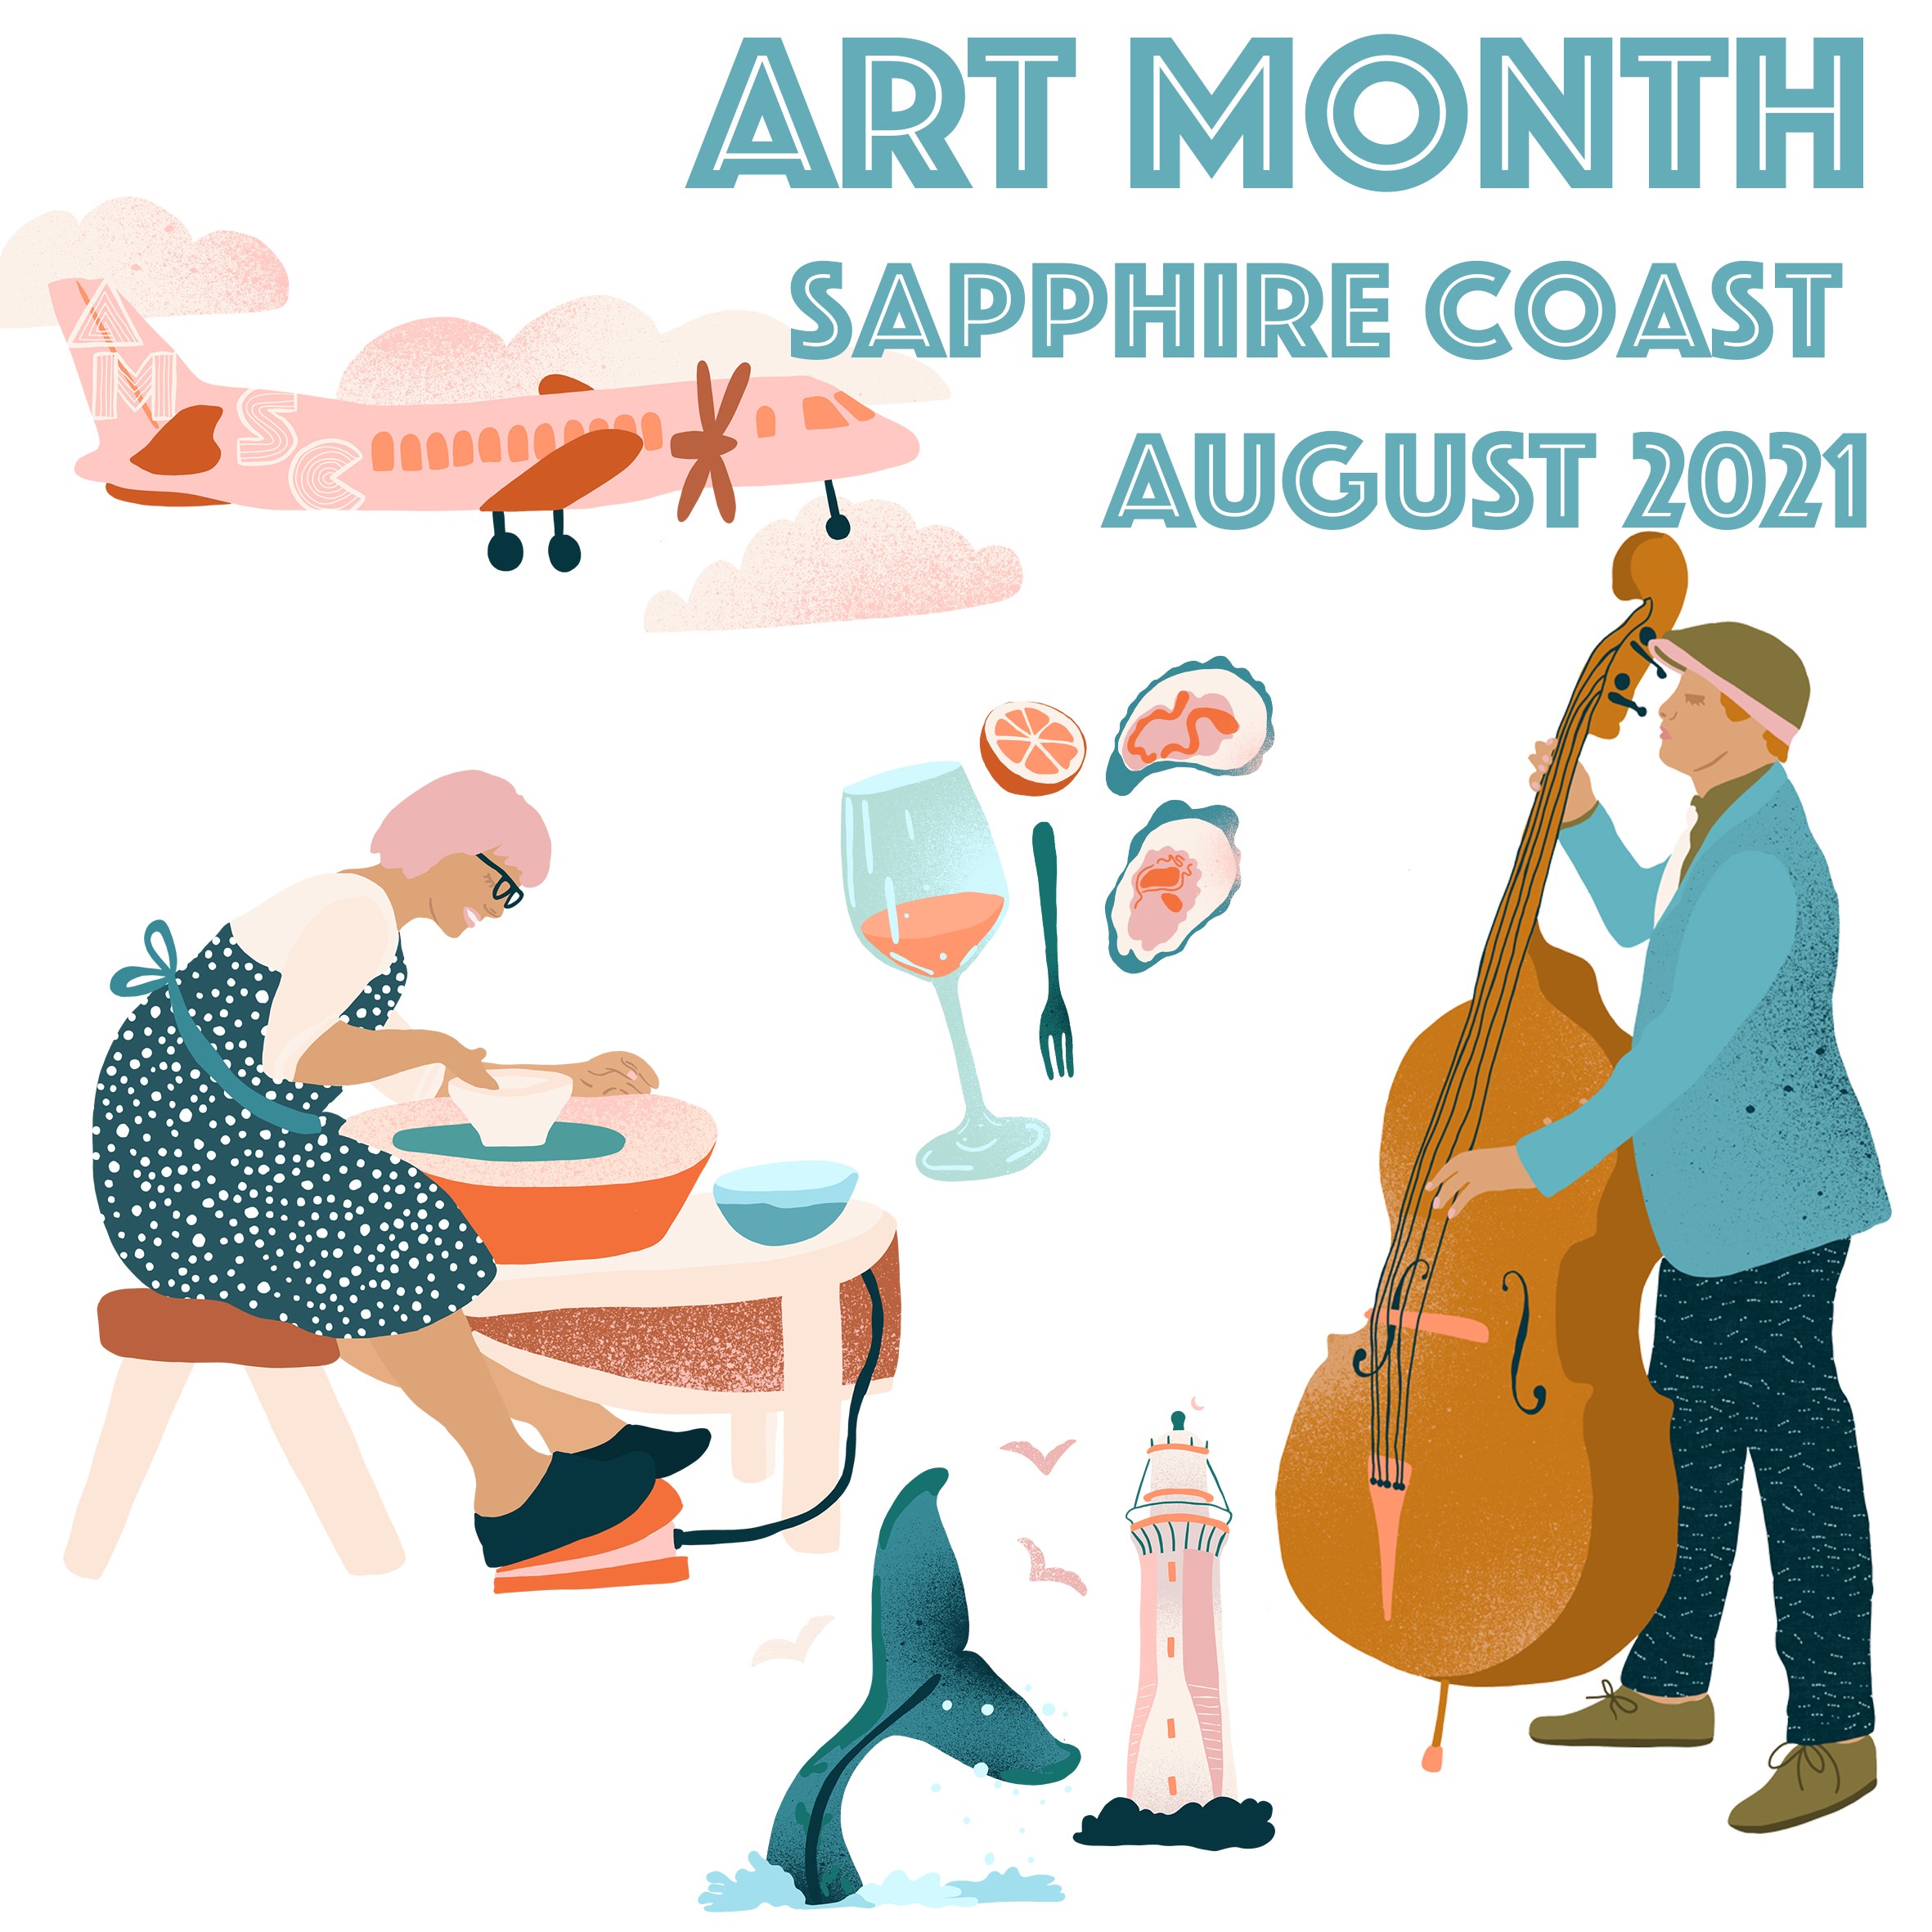 Time to get creative for Sapphire Coast ART MONTH